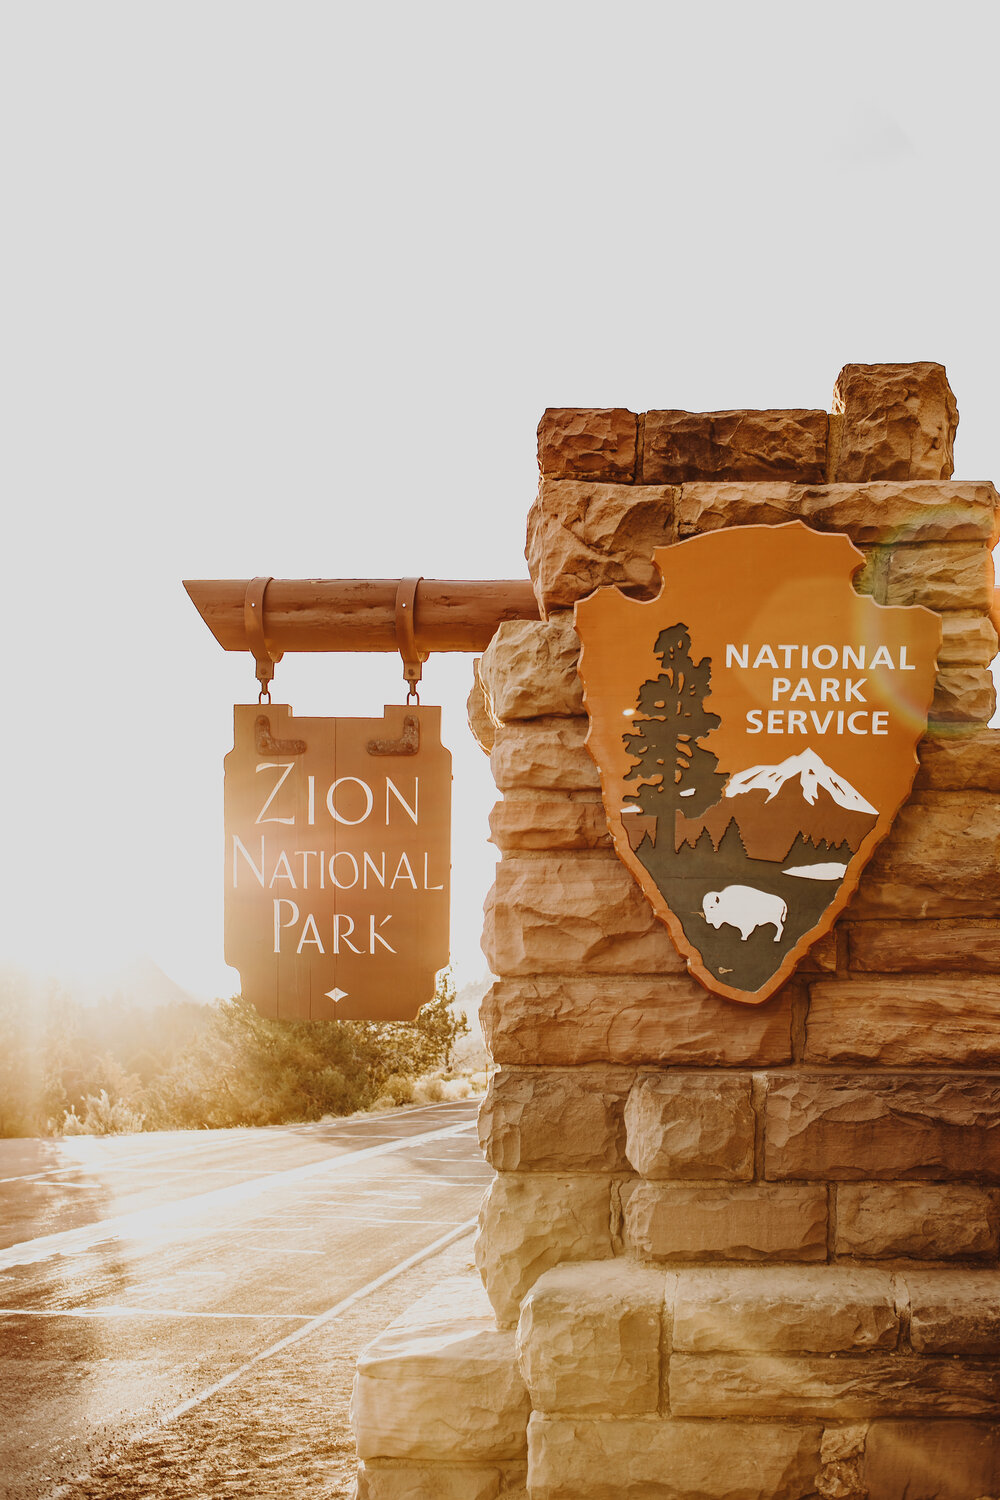 zion-national-park-complete-travel-guide